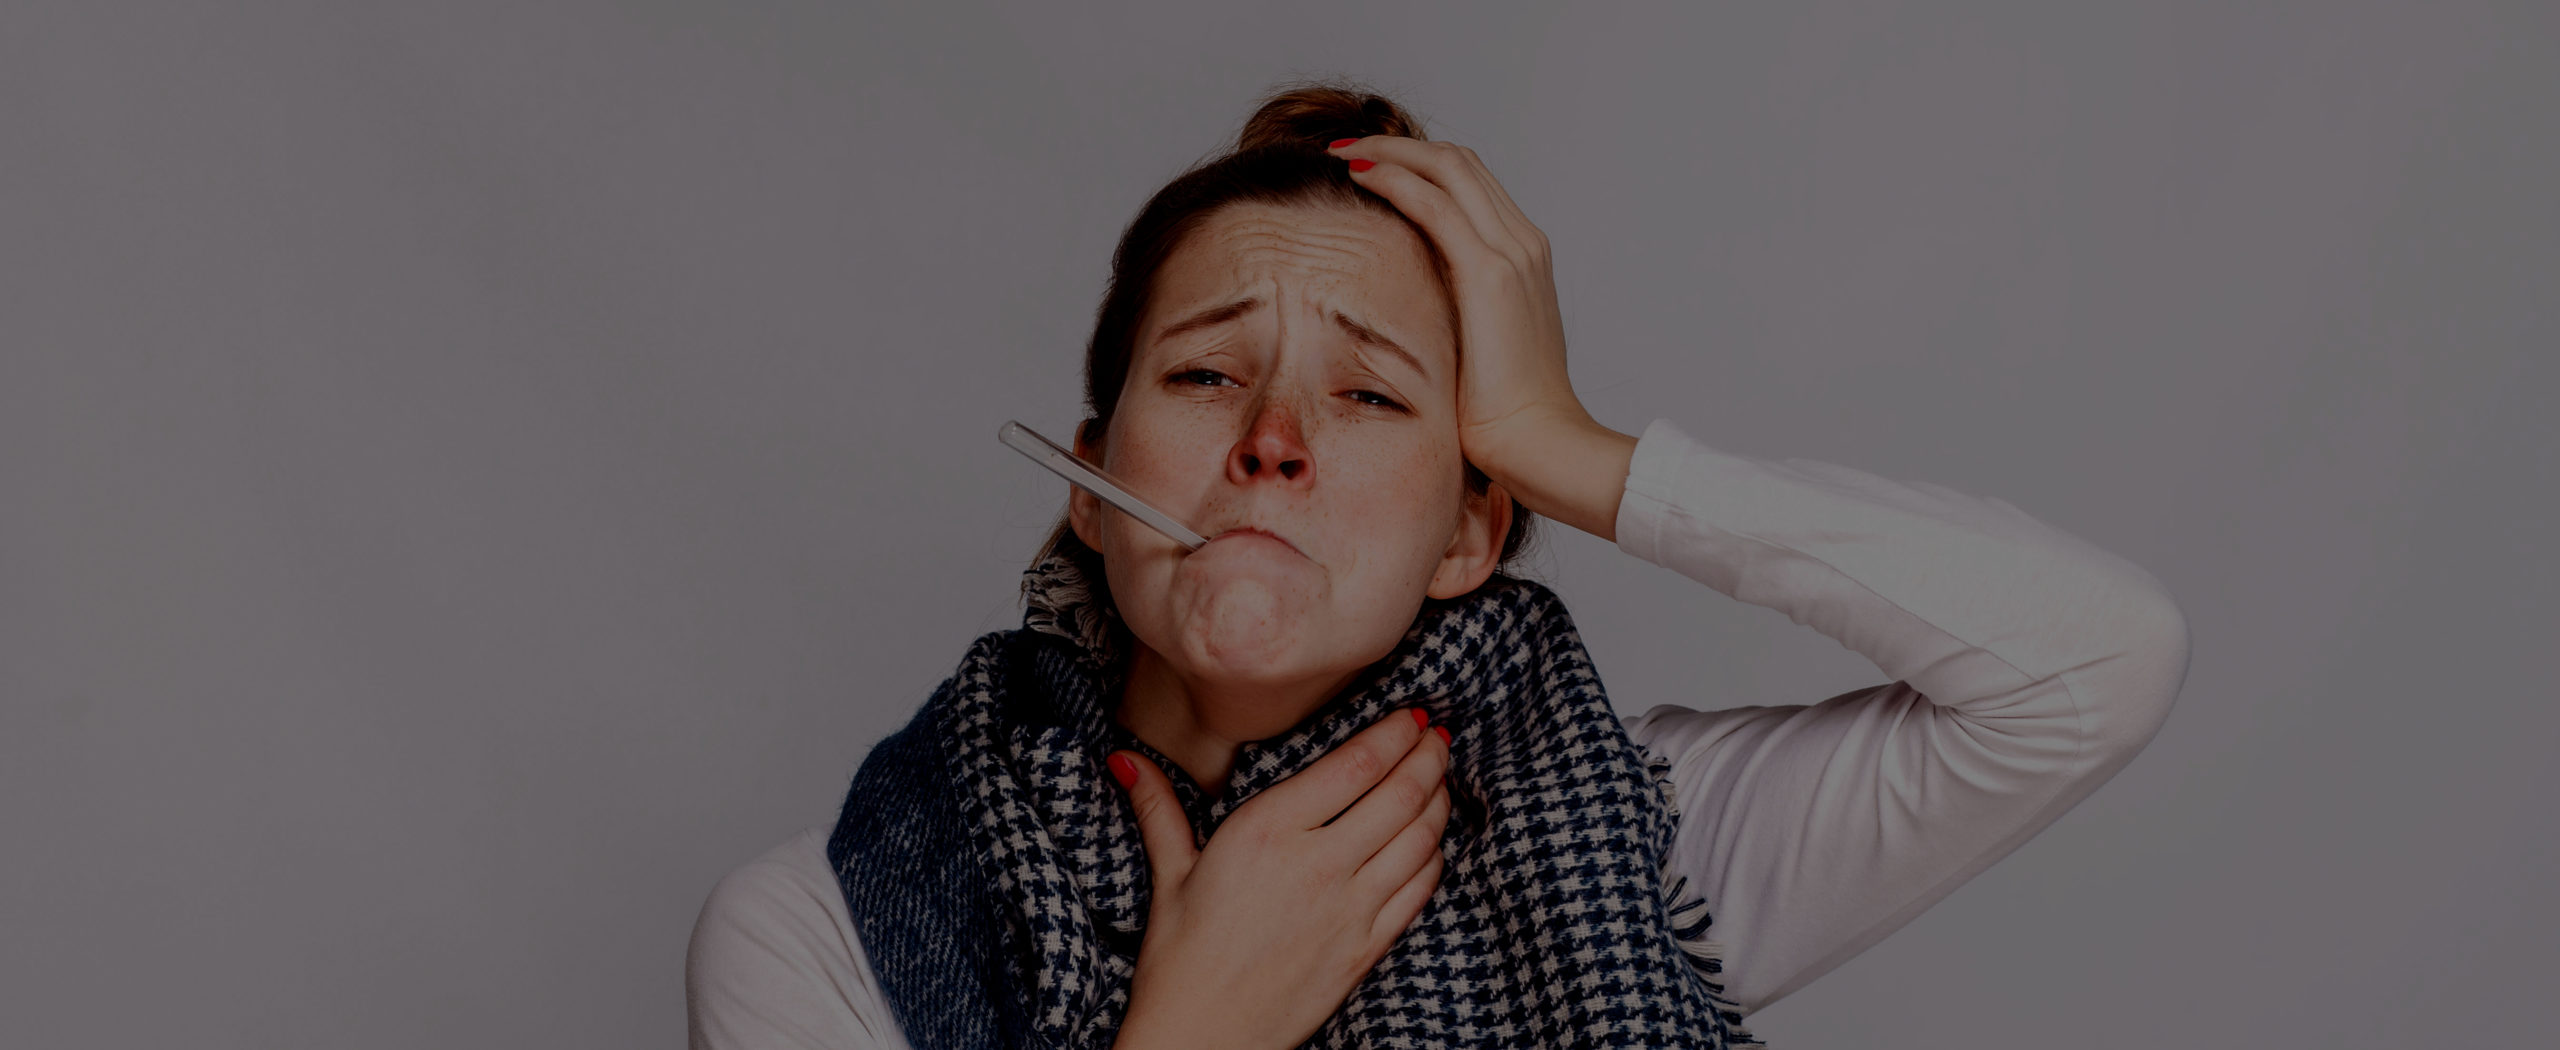 FLU VS COVID: How to identify Symptoms and Differences